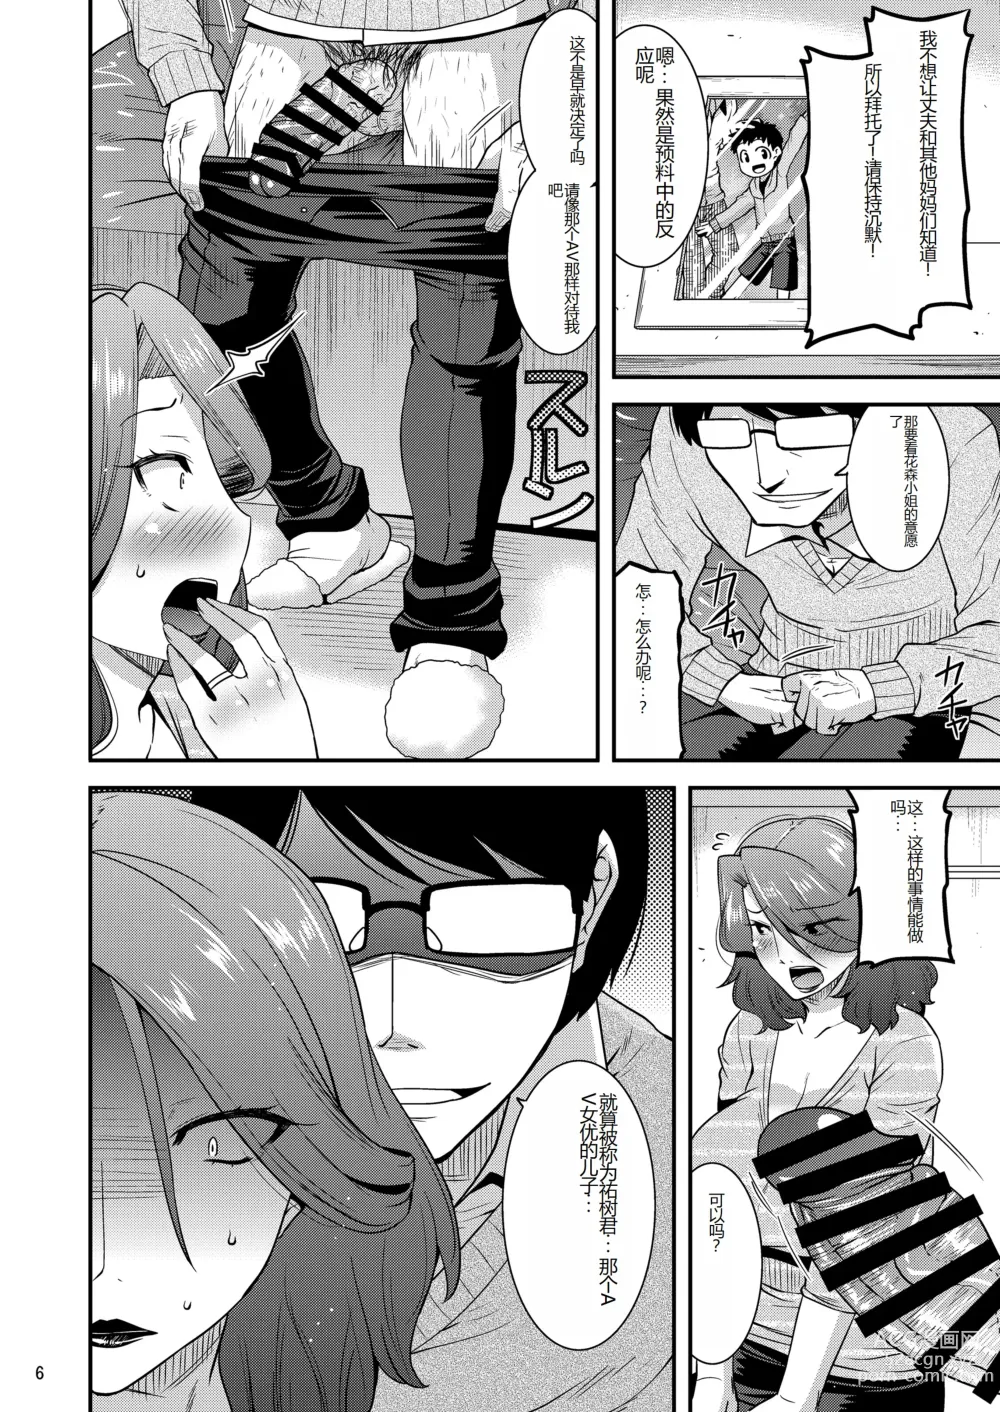 Page 6 of doujinshi Suck for you